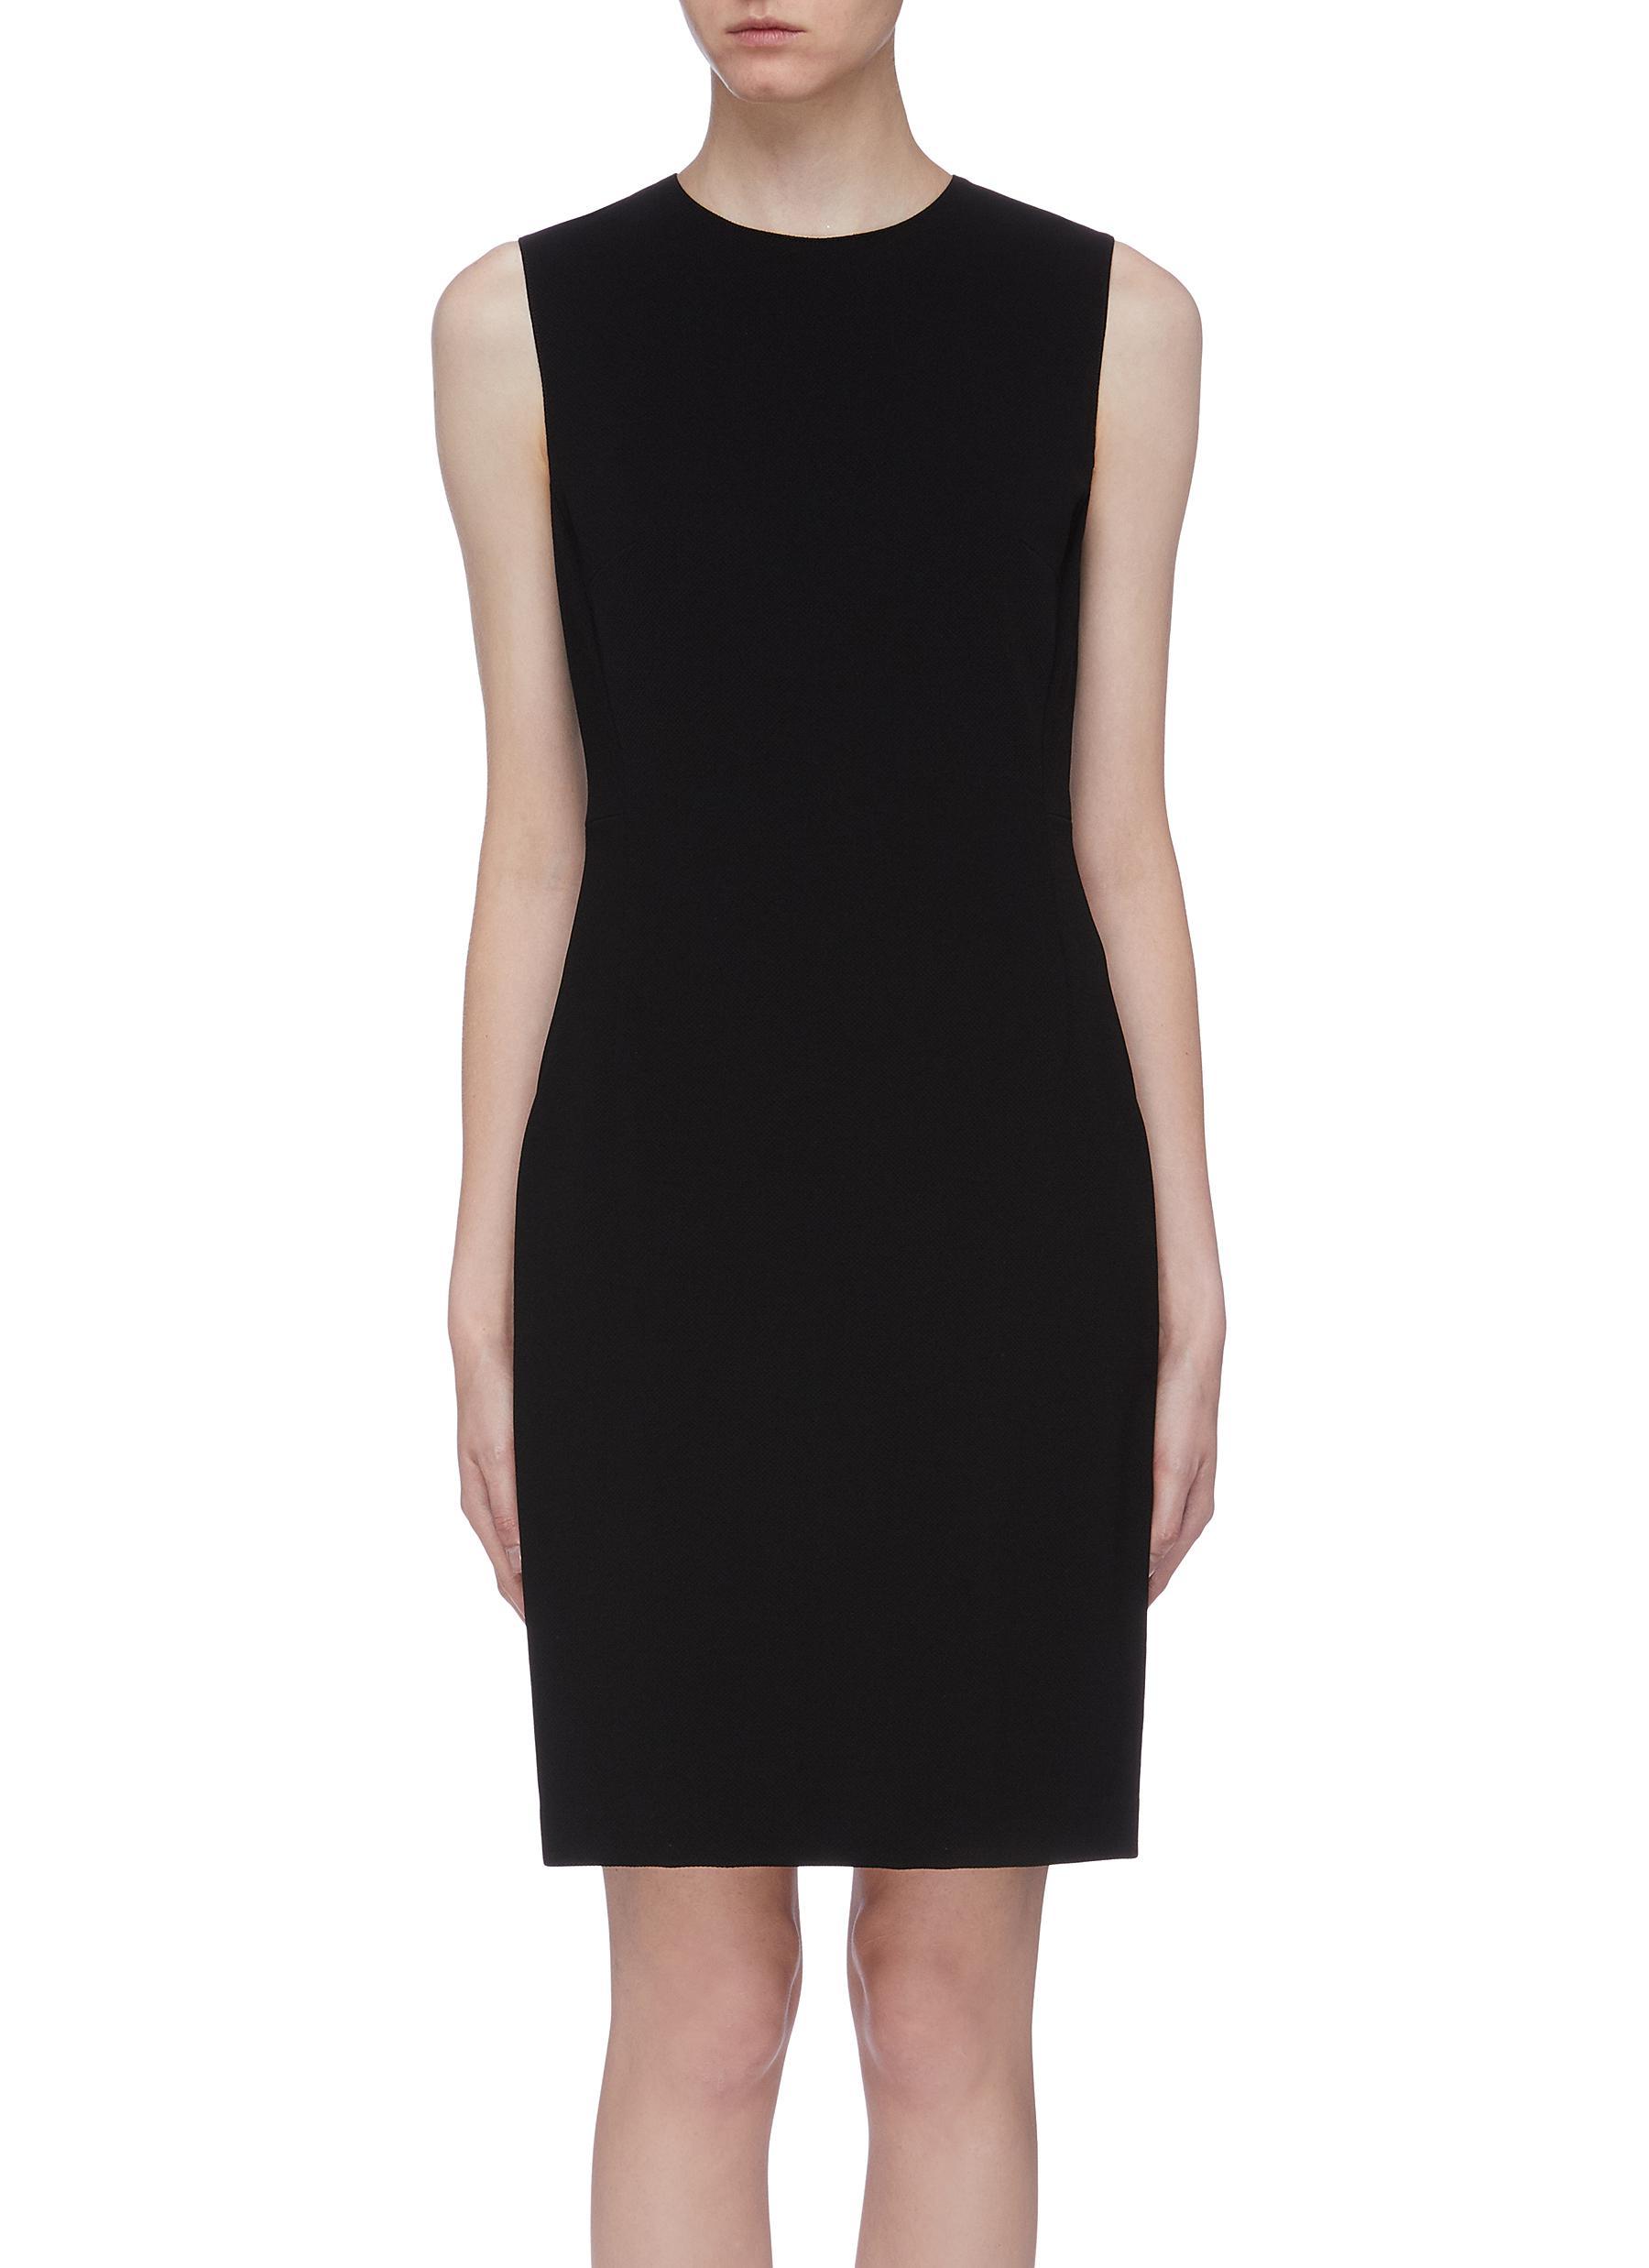 Theory Synthetic Sleeveless Knit Dress in Black - Lyst